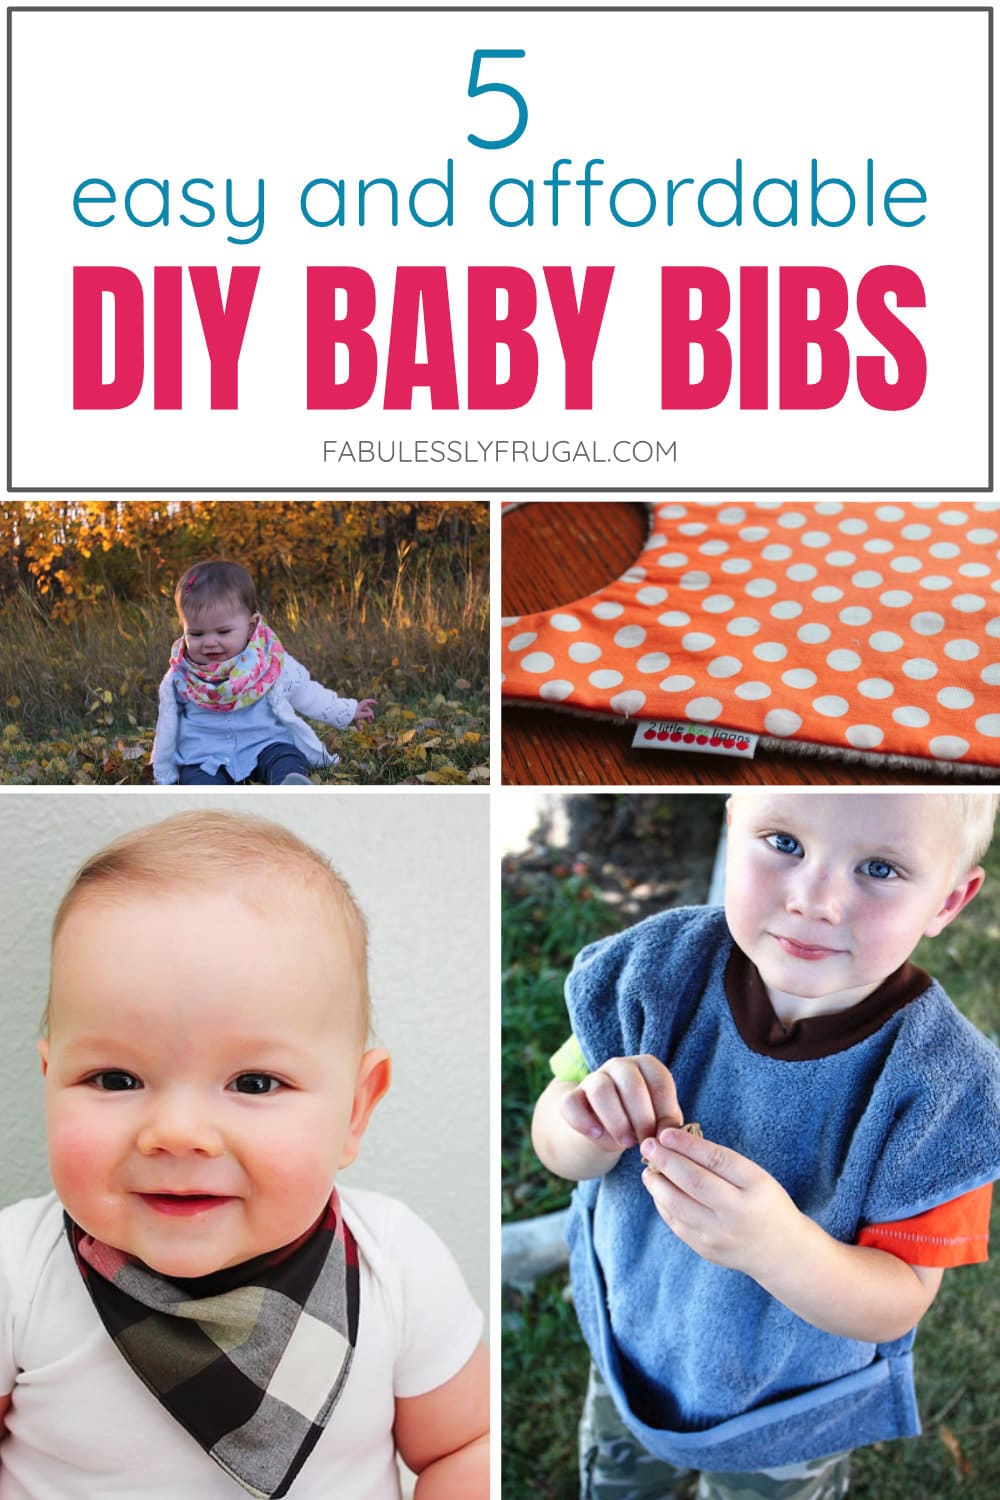 5 Easy and affordable DIY baby bibs